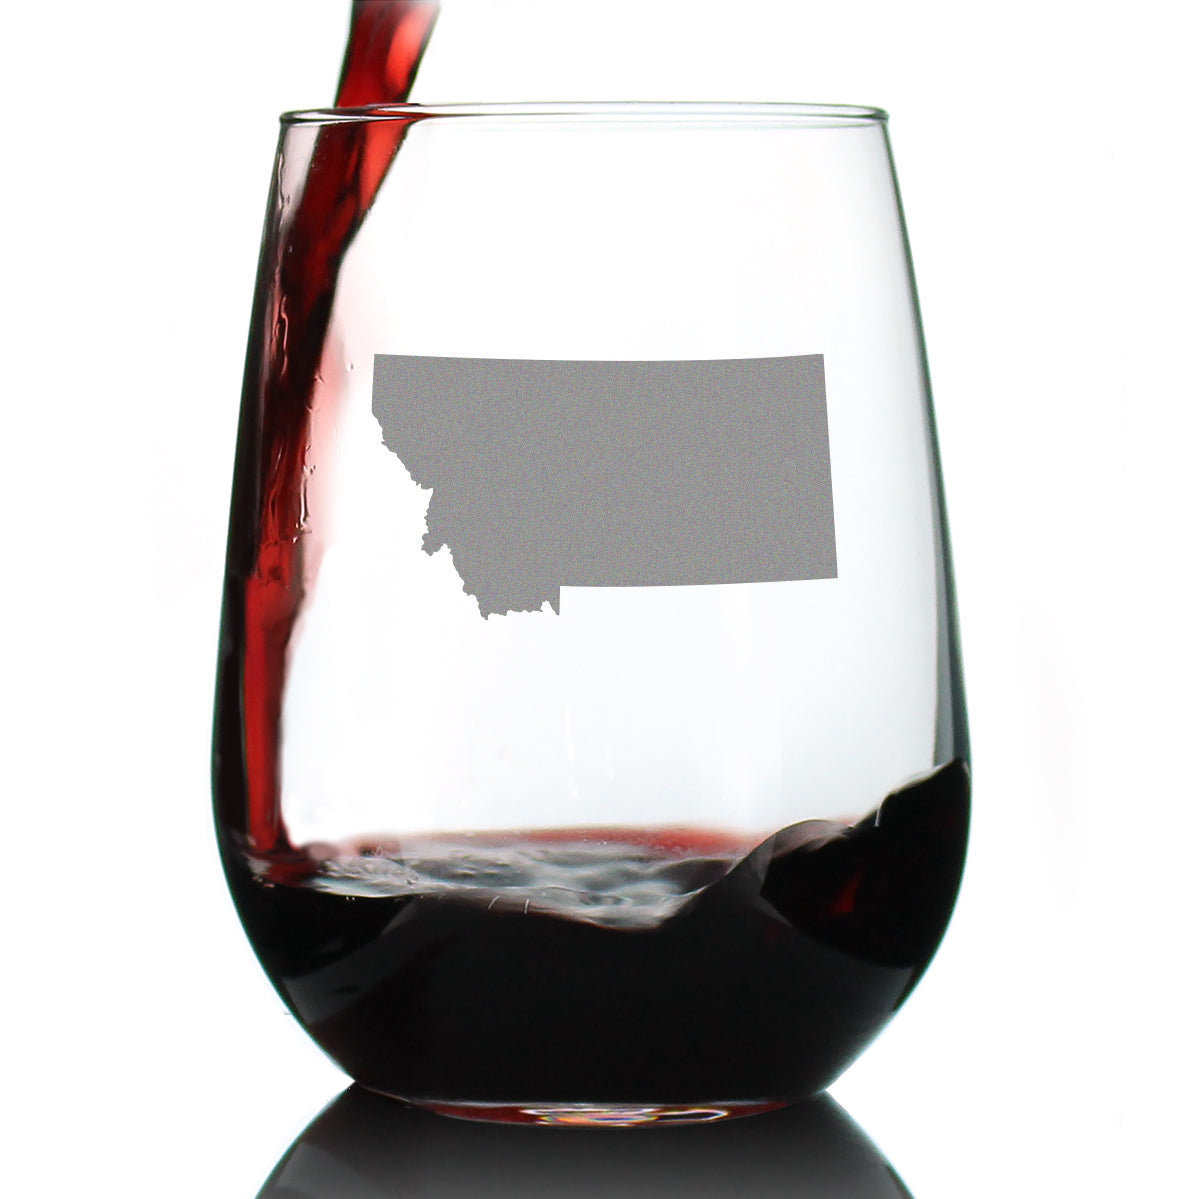 Montana State Outline Stemless Wine Glass - State Themed Drinking Decor and Gifts for Montanan Women &amp; Men - Large 17 Oz Glasses